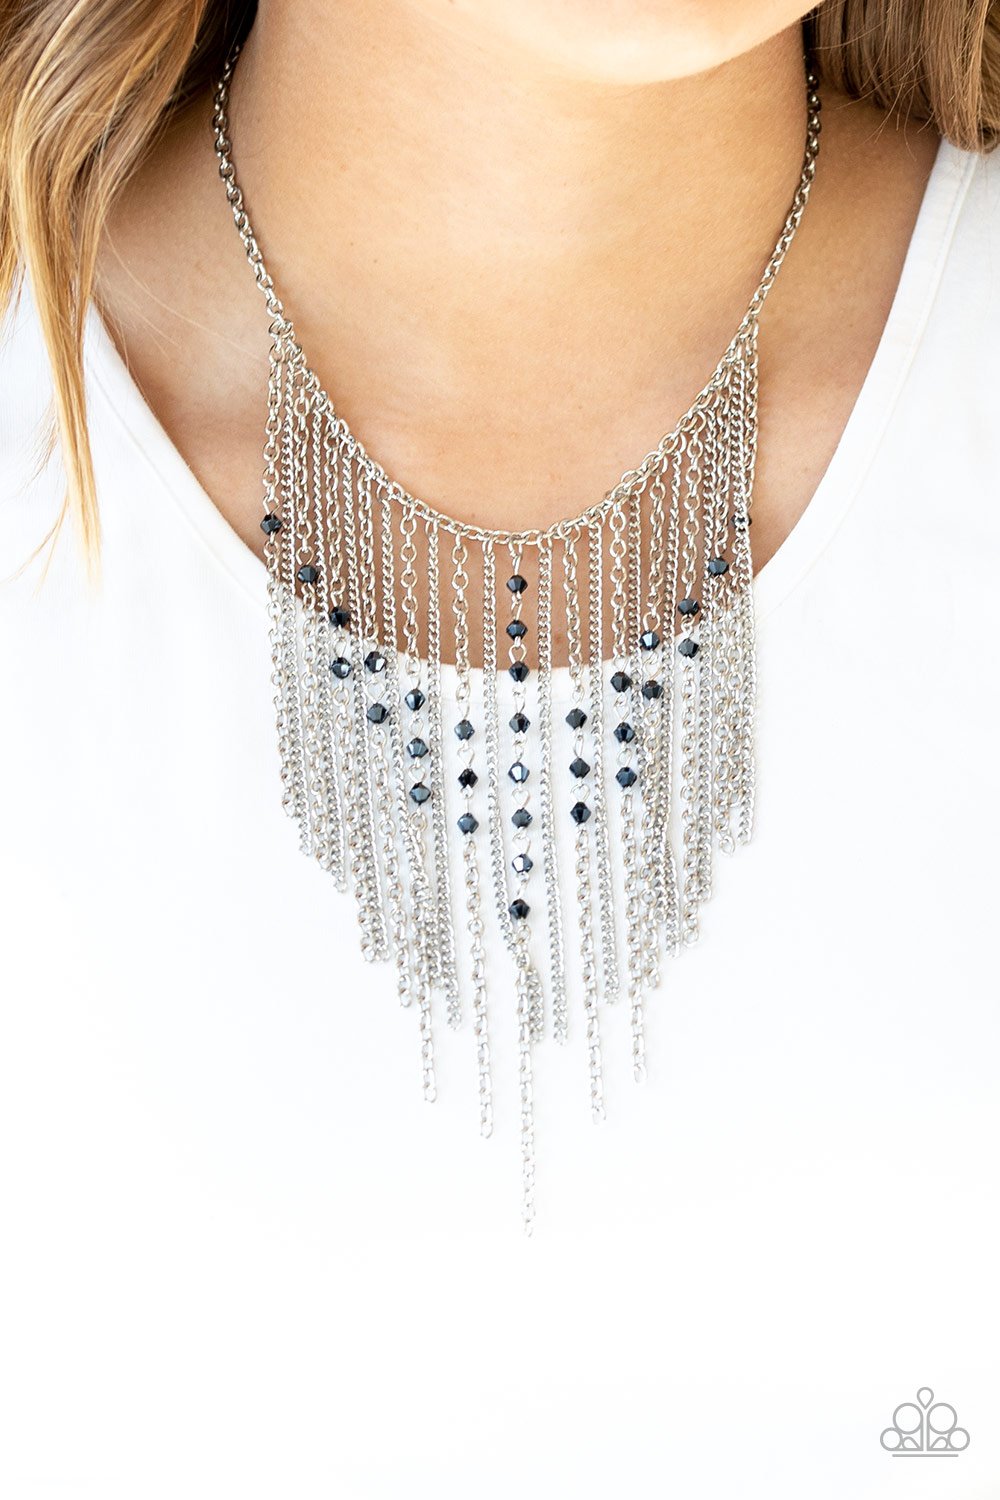 First Class Fringe-blue-Paparazzi necklace